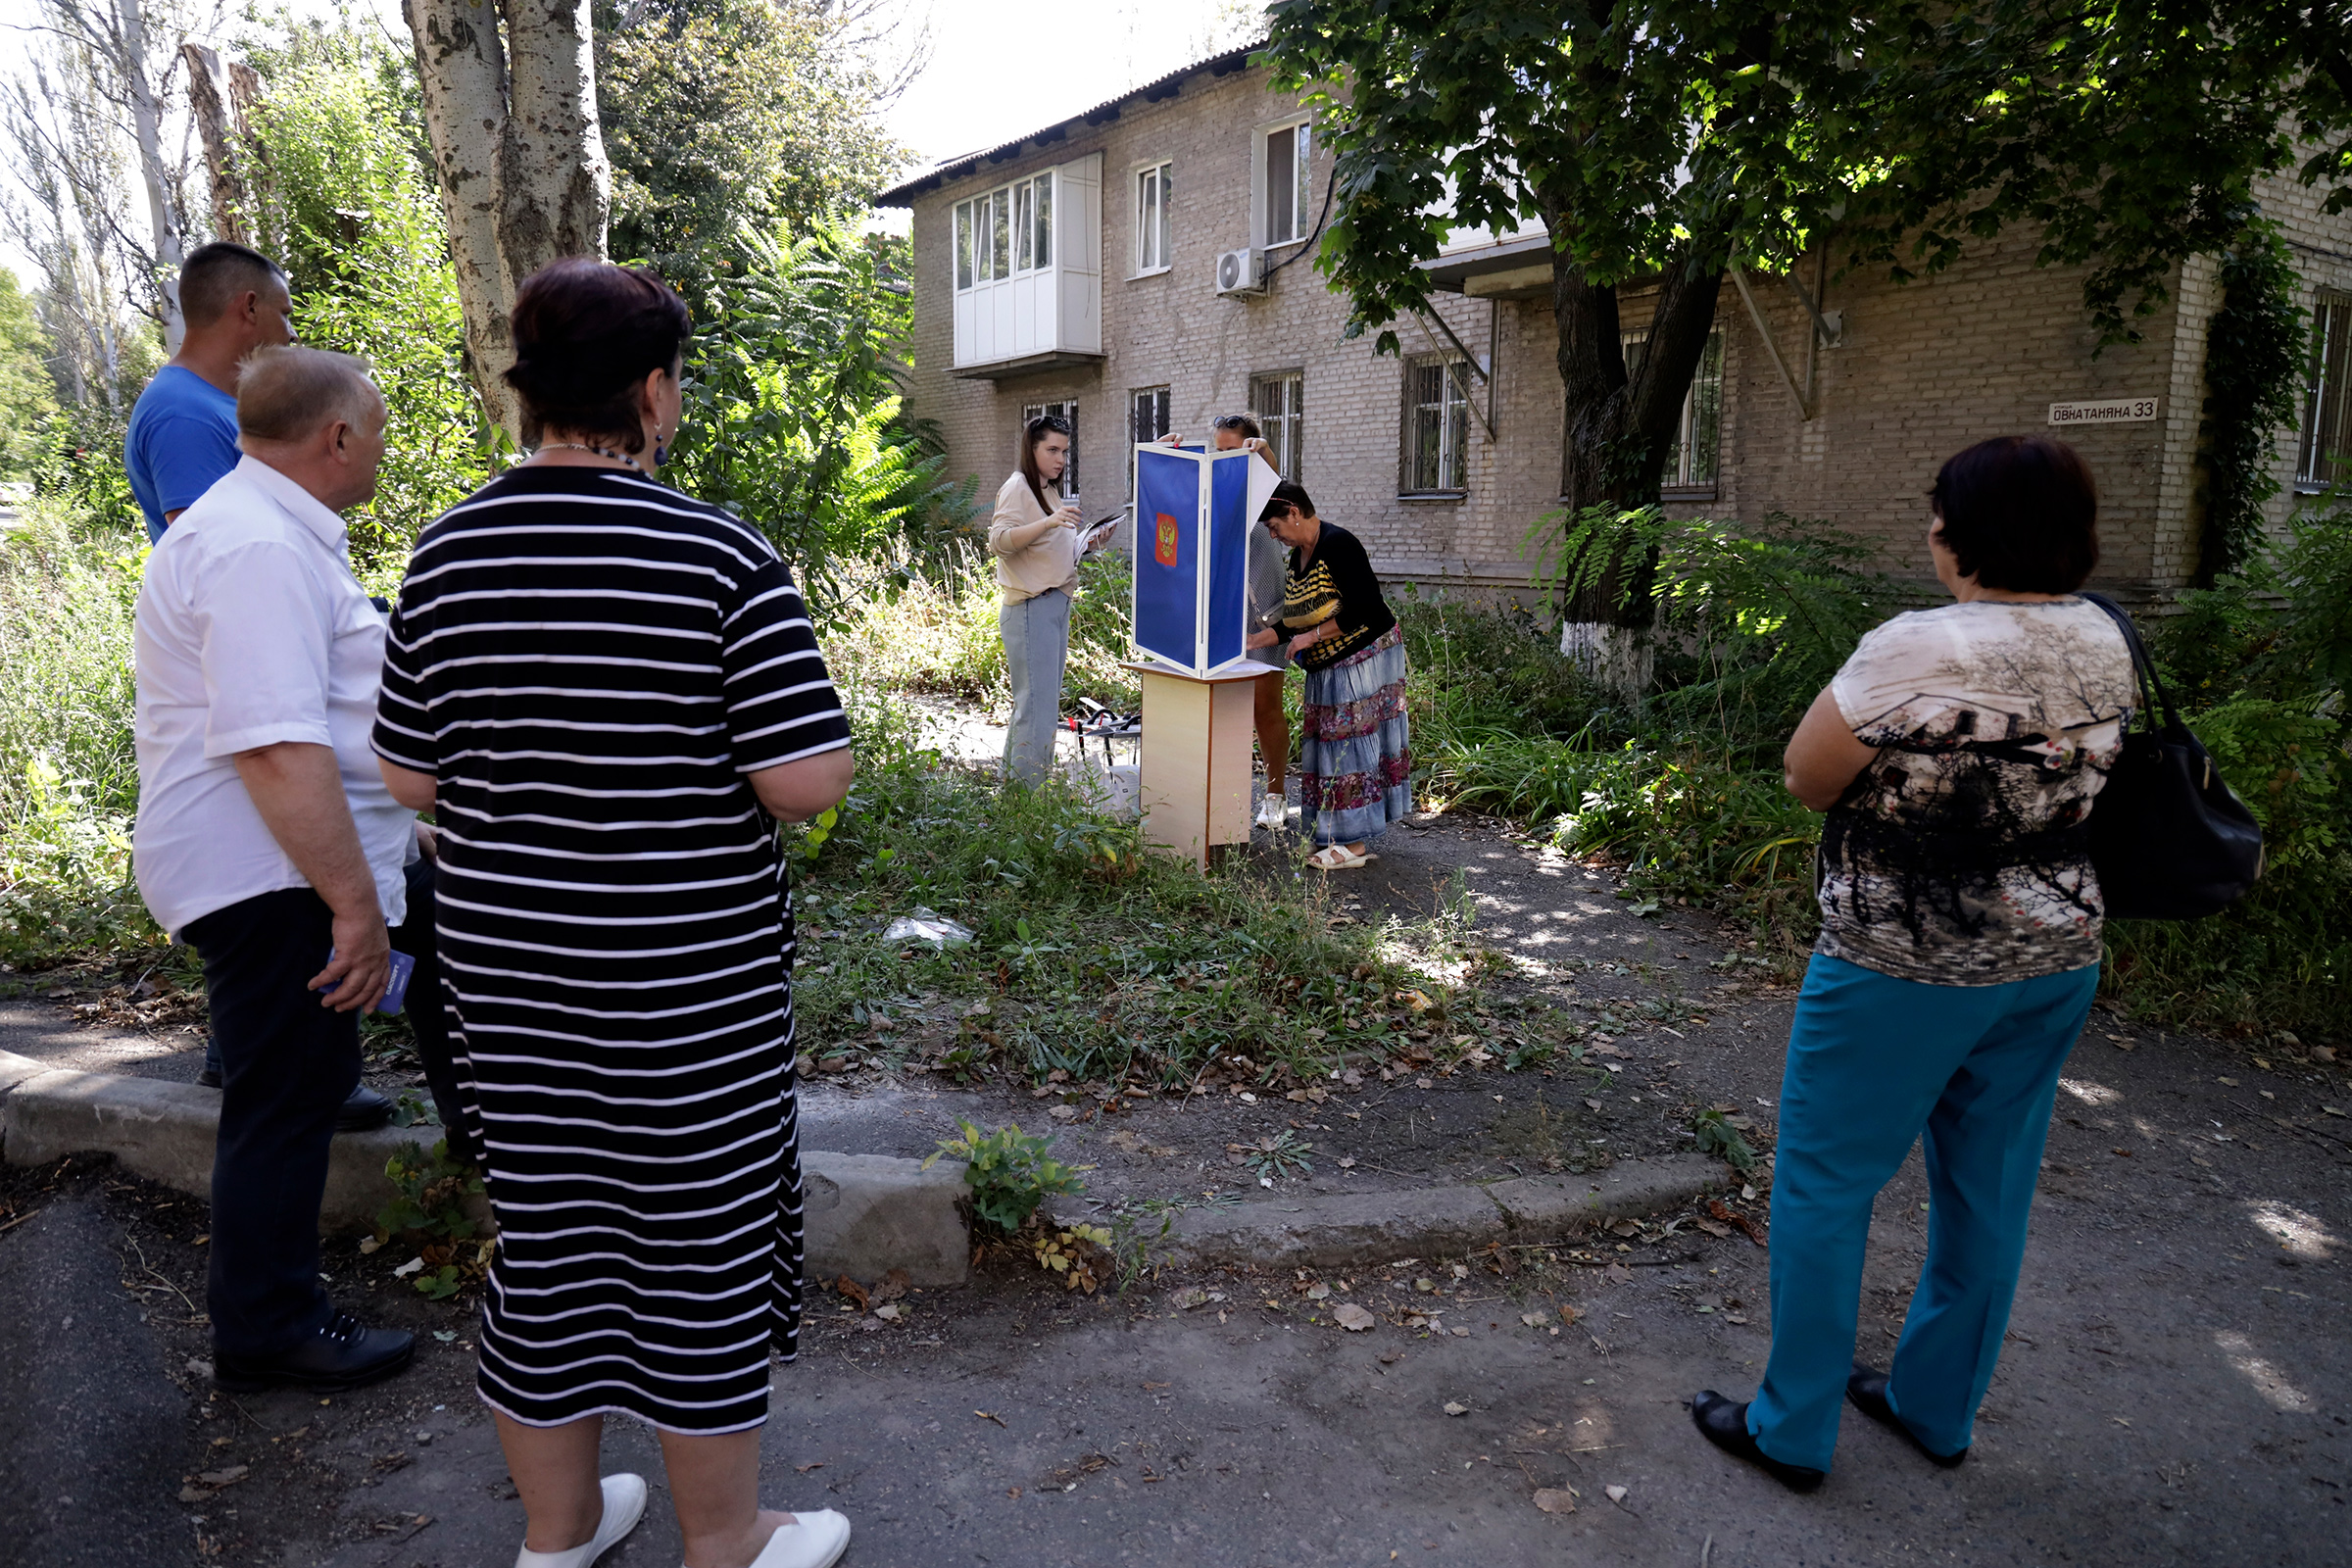 Voters gather to cast their ballots in a street near their apartment building during local elections in Donetsk, the capital of Russian-occupied Donetsk region, in eastern Ukraine, on Sept. 6. (AP)